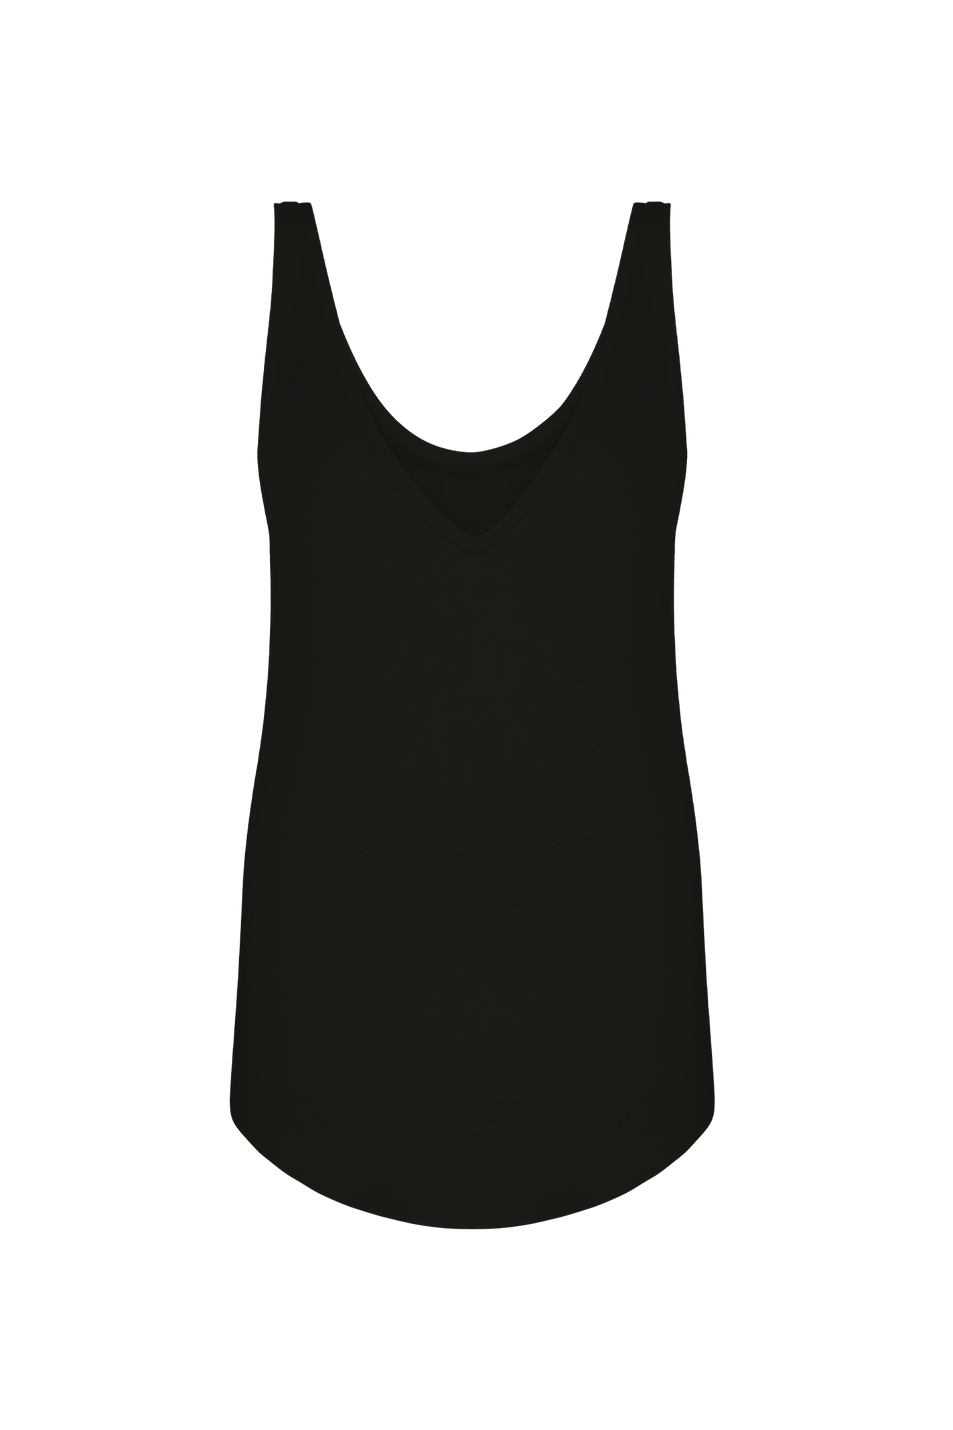 Buy CONVERTIBLE SINGLET online at Intimo